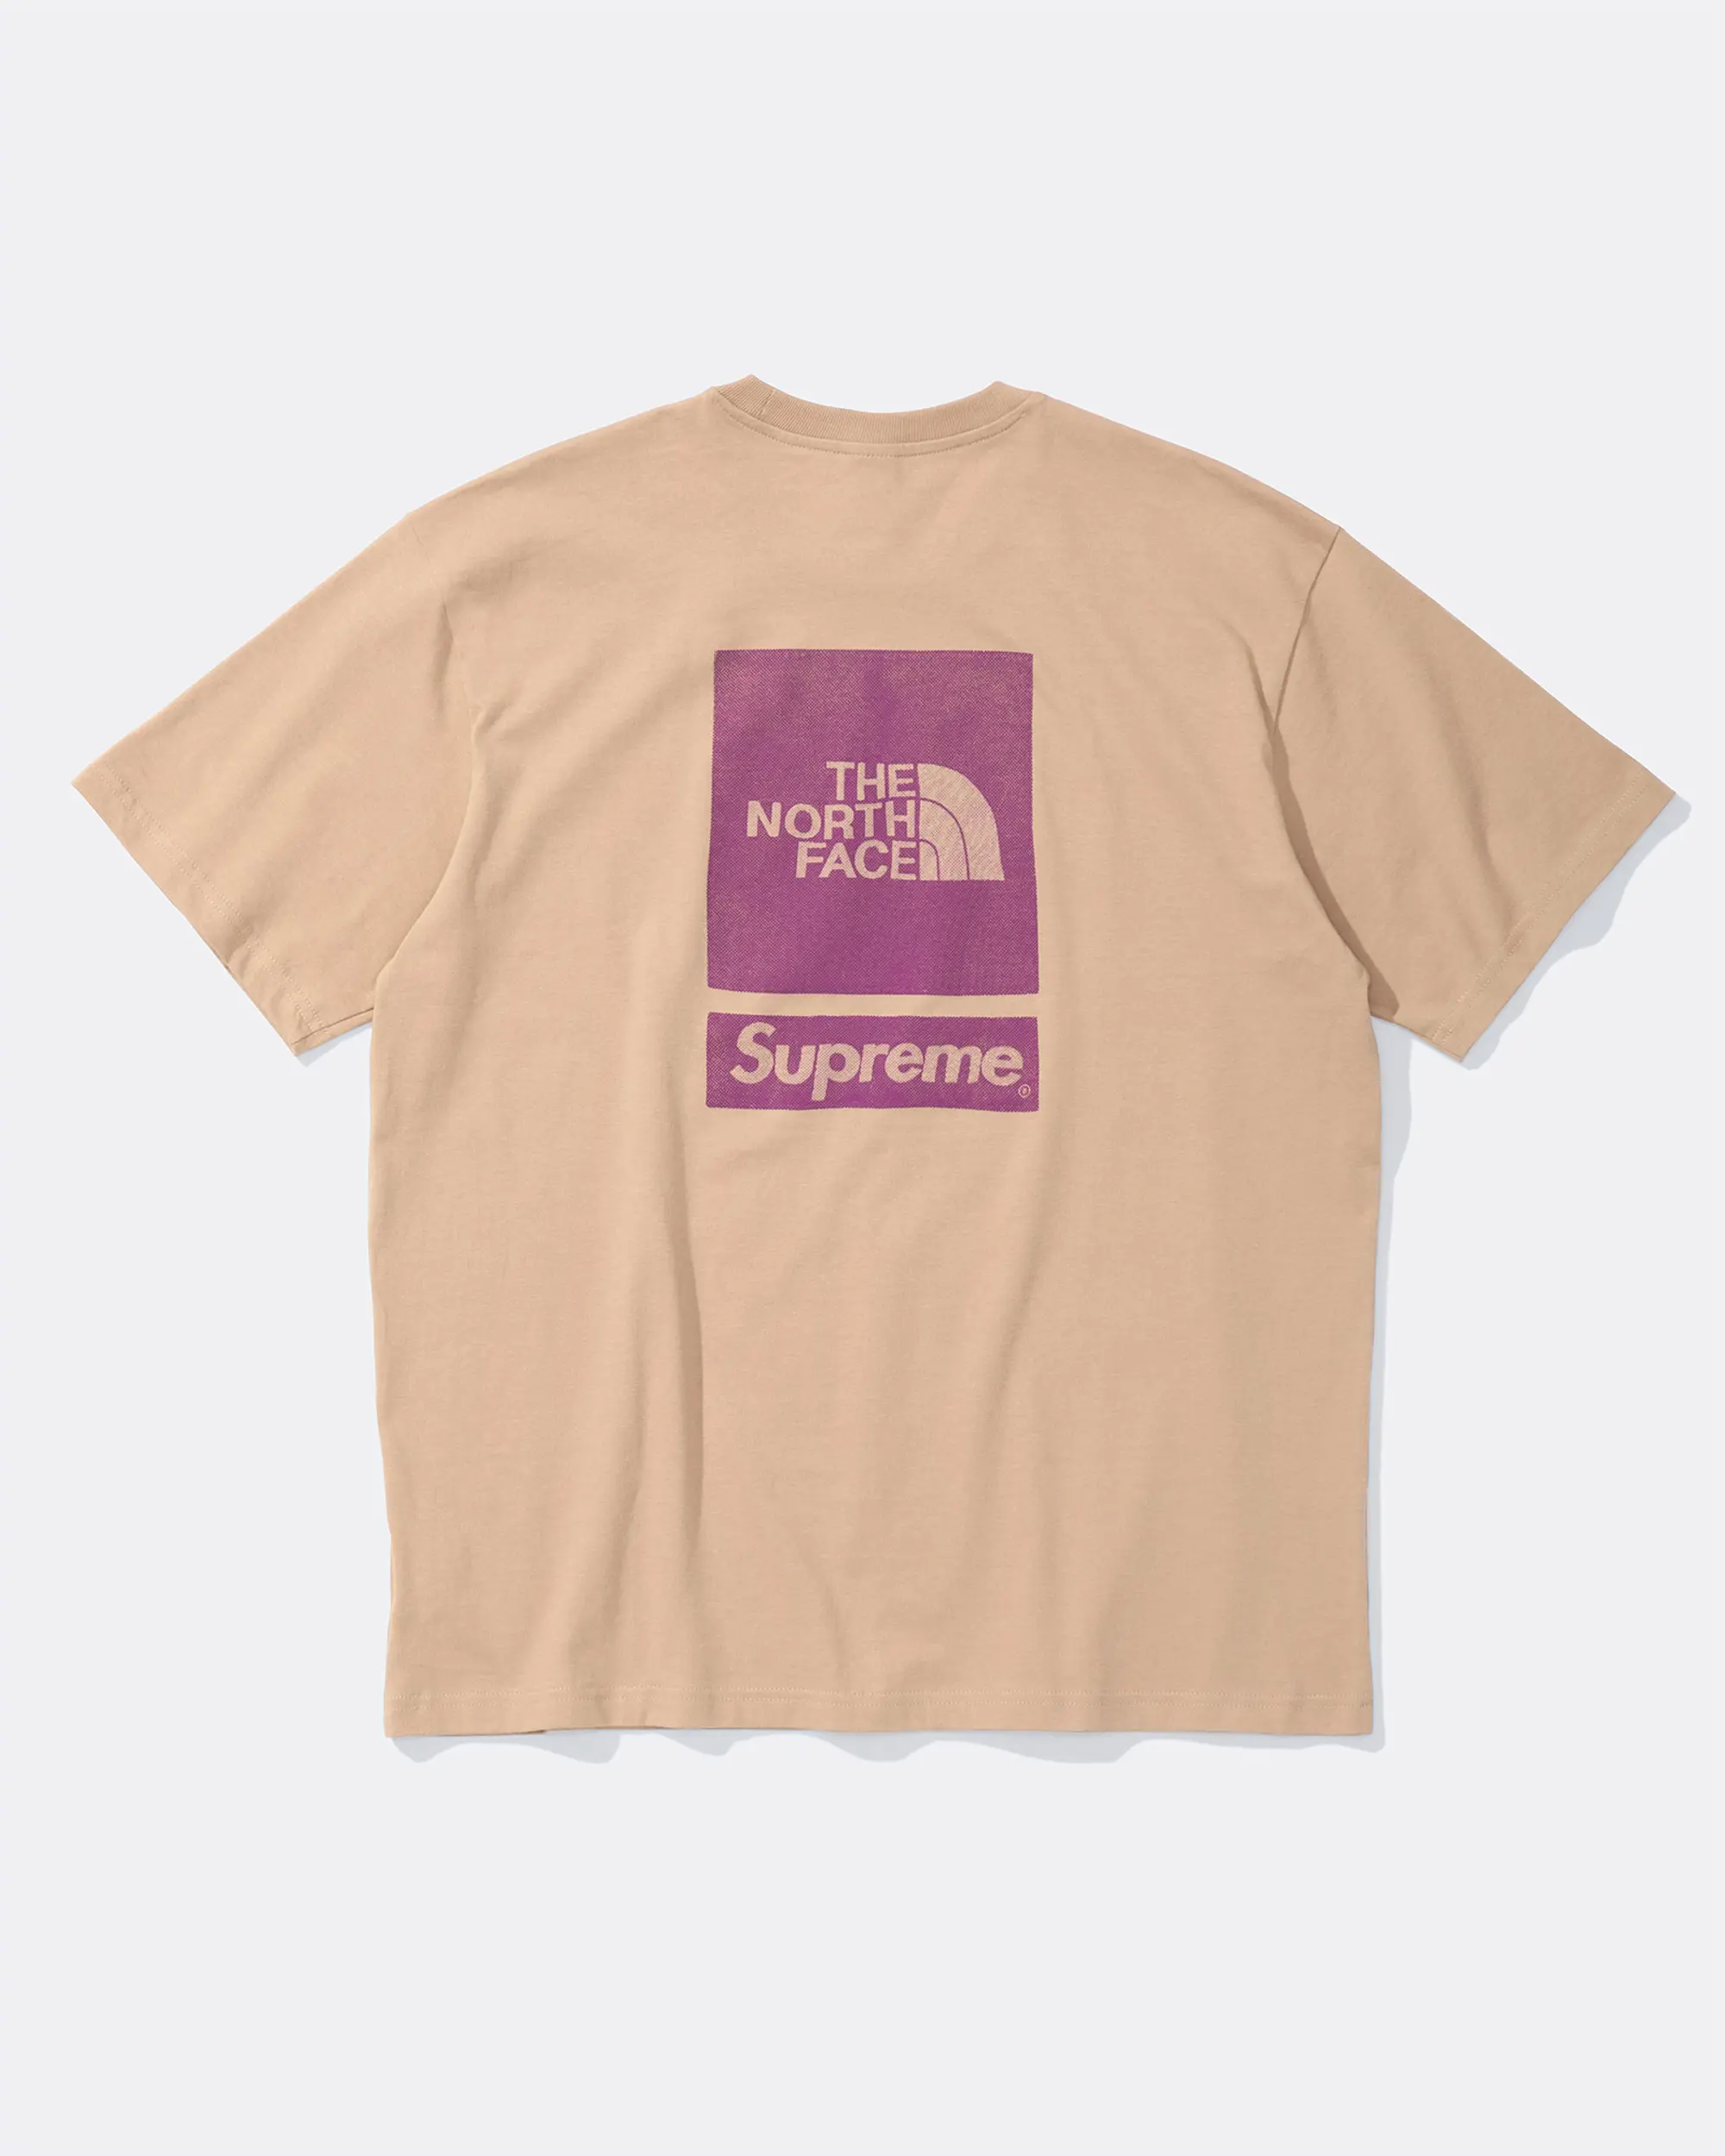 Supreme®/The North Face® S/S Top